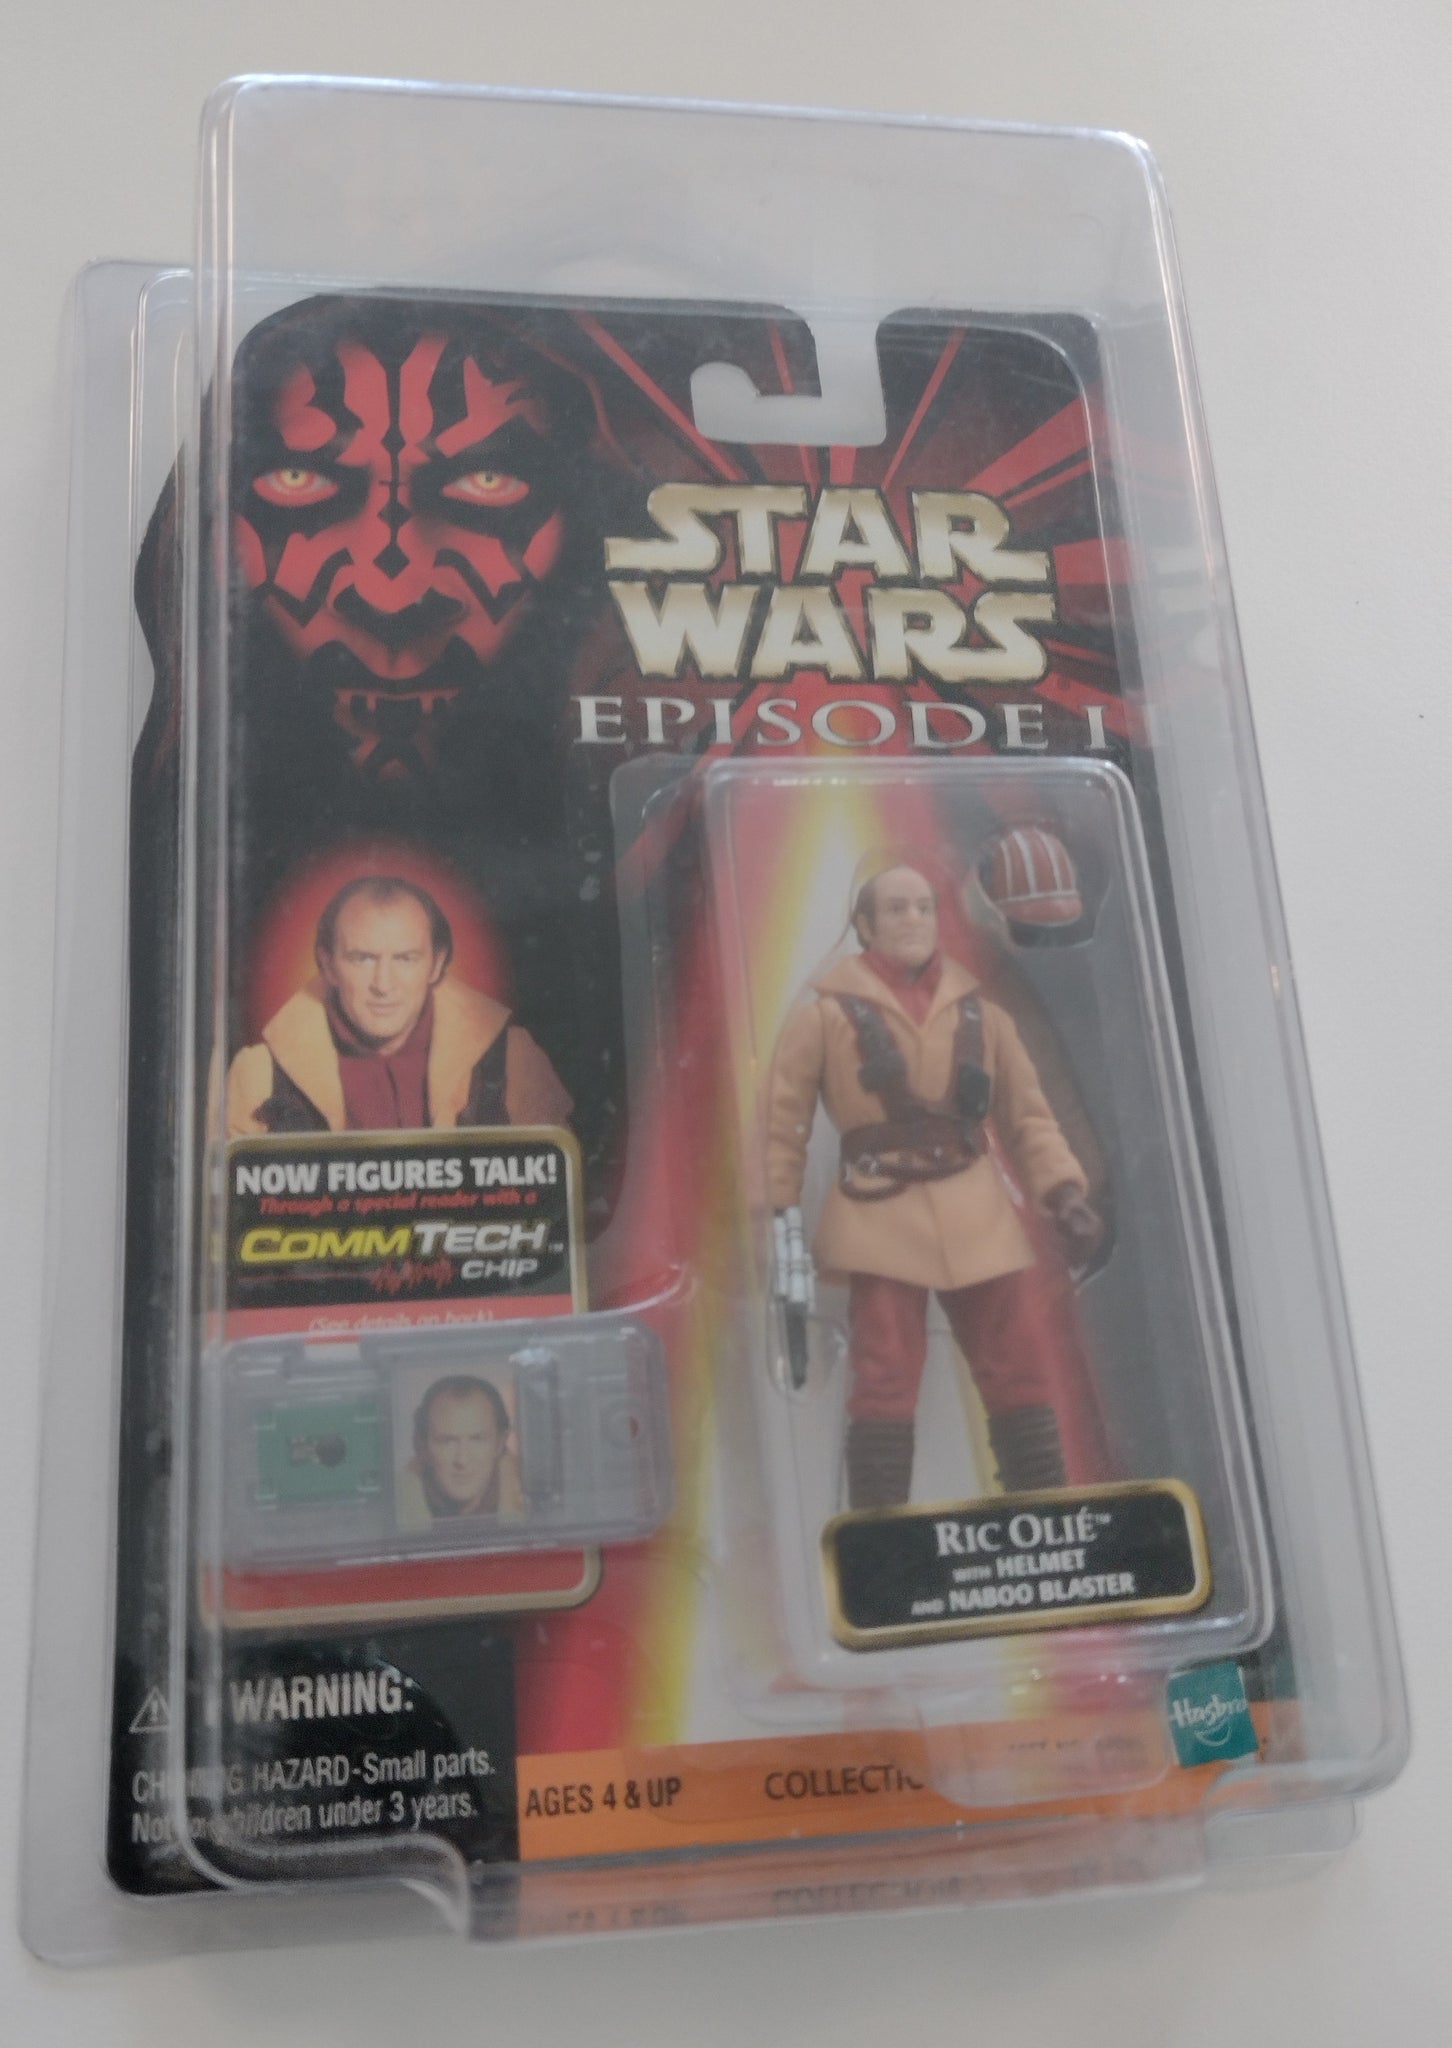 Star Wars Episode 1 - Ric Olie (closed hand) Action Figure